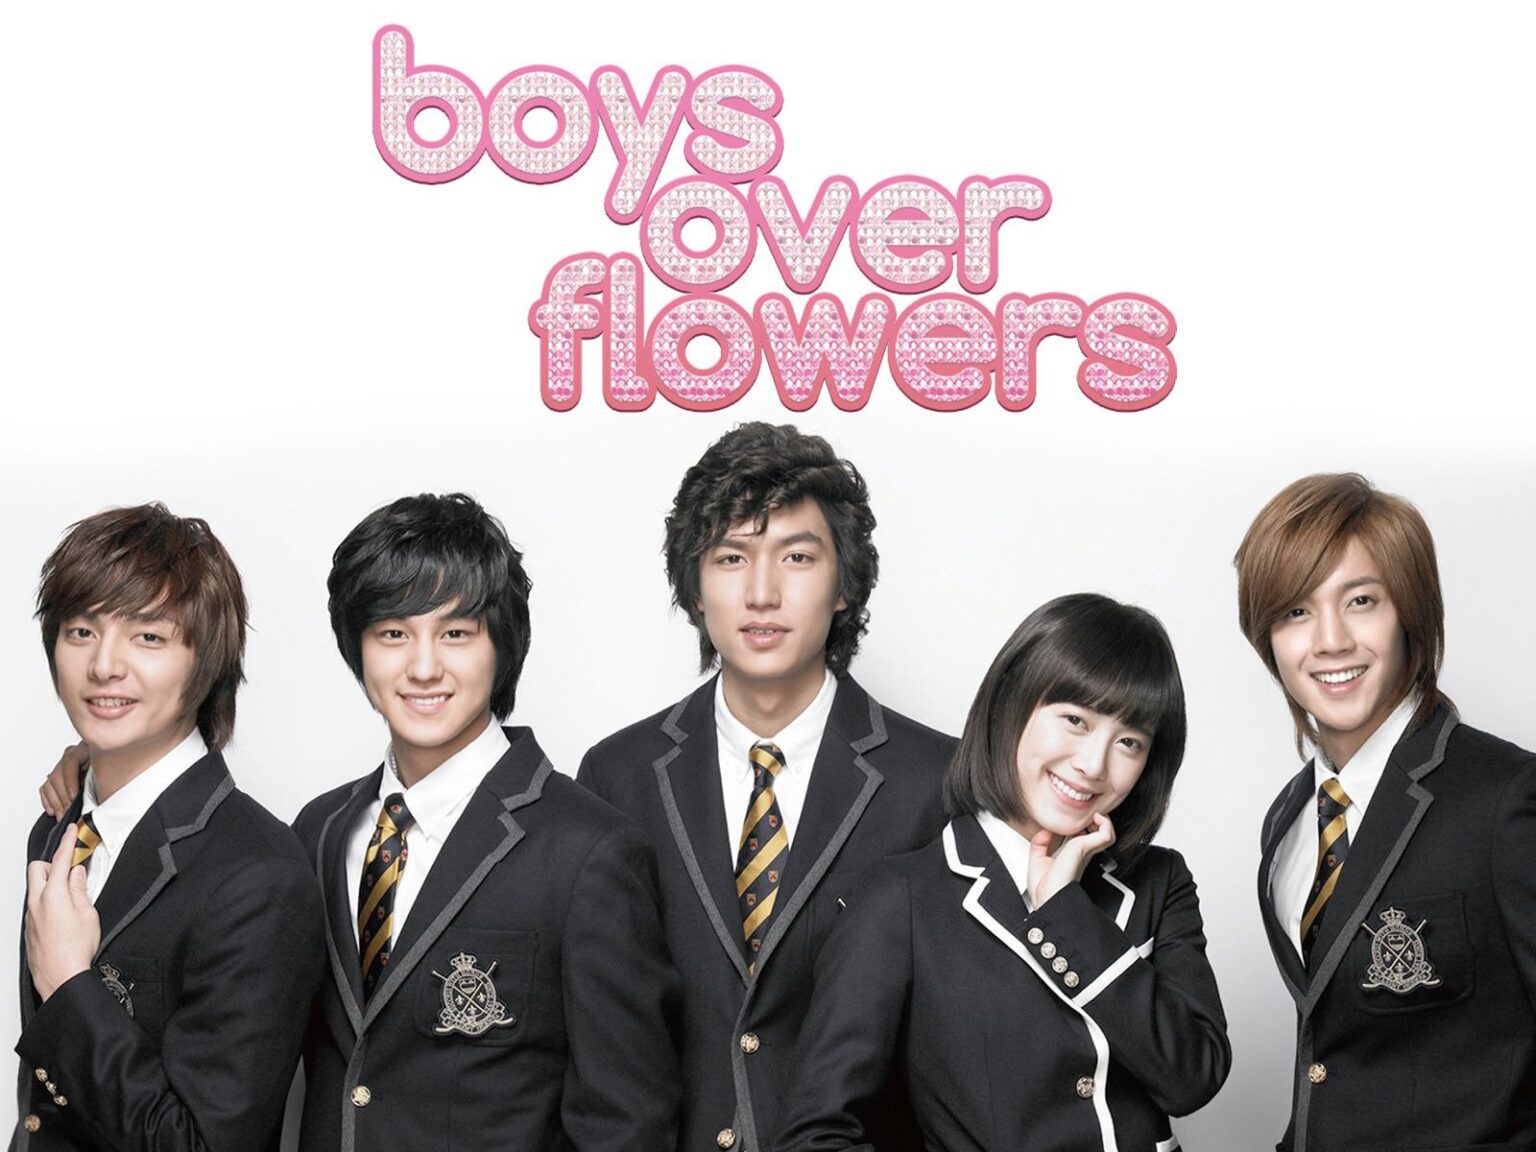 If you just can't get enough of the K-drama 'Boys Over Flowers', here are all of the adaptations you can watch to fill the void.